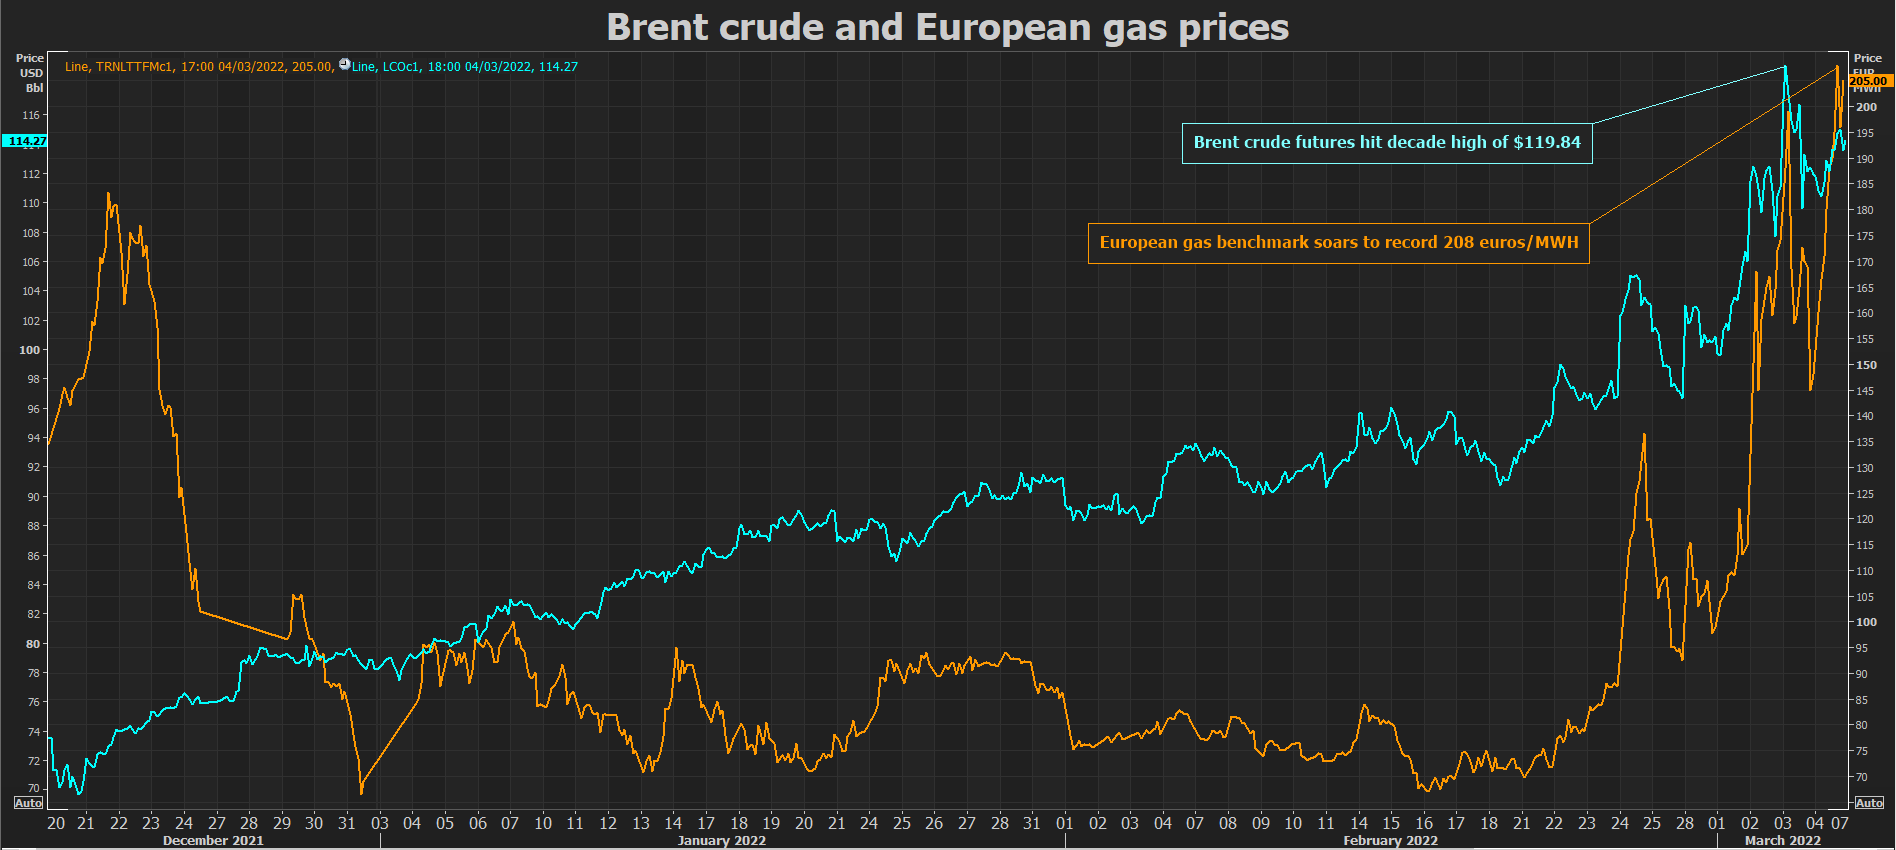 Brent crude and European gas prices